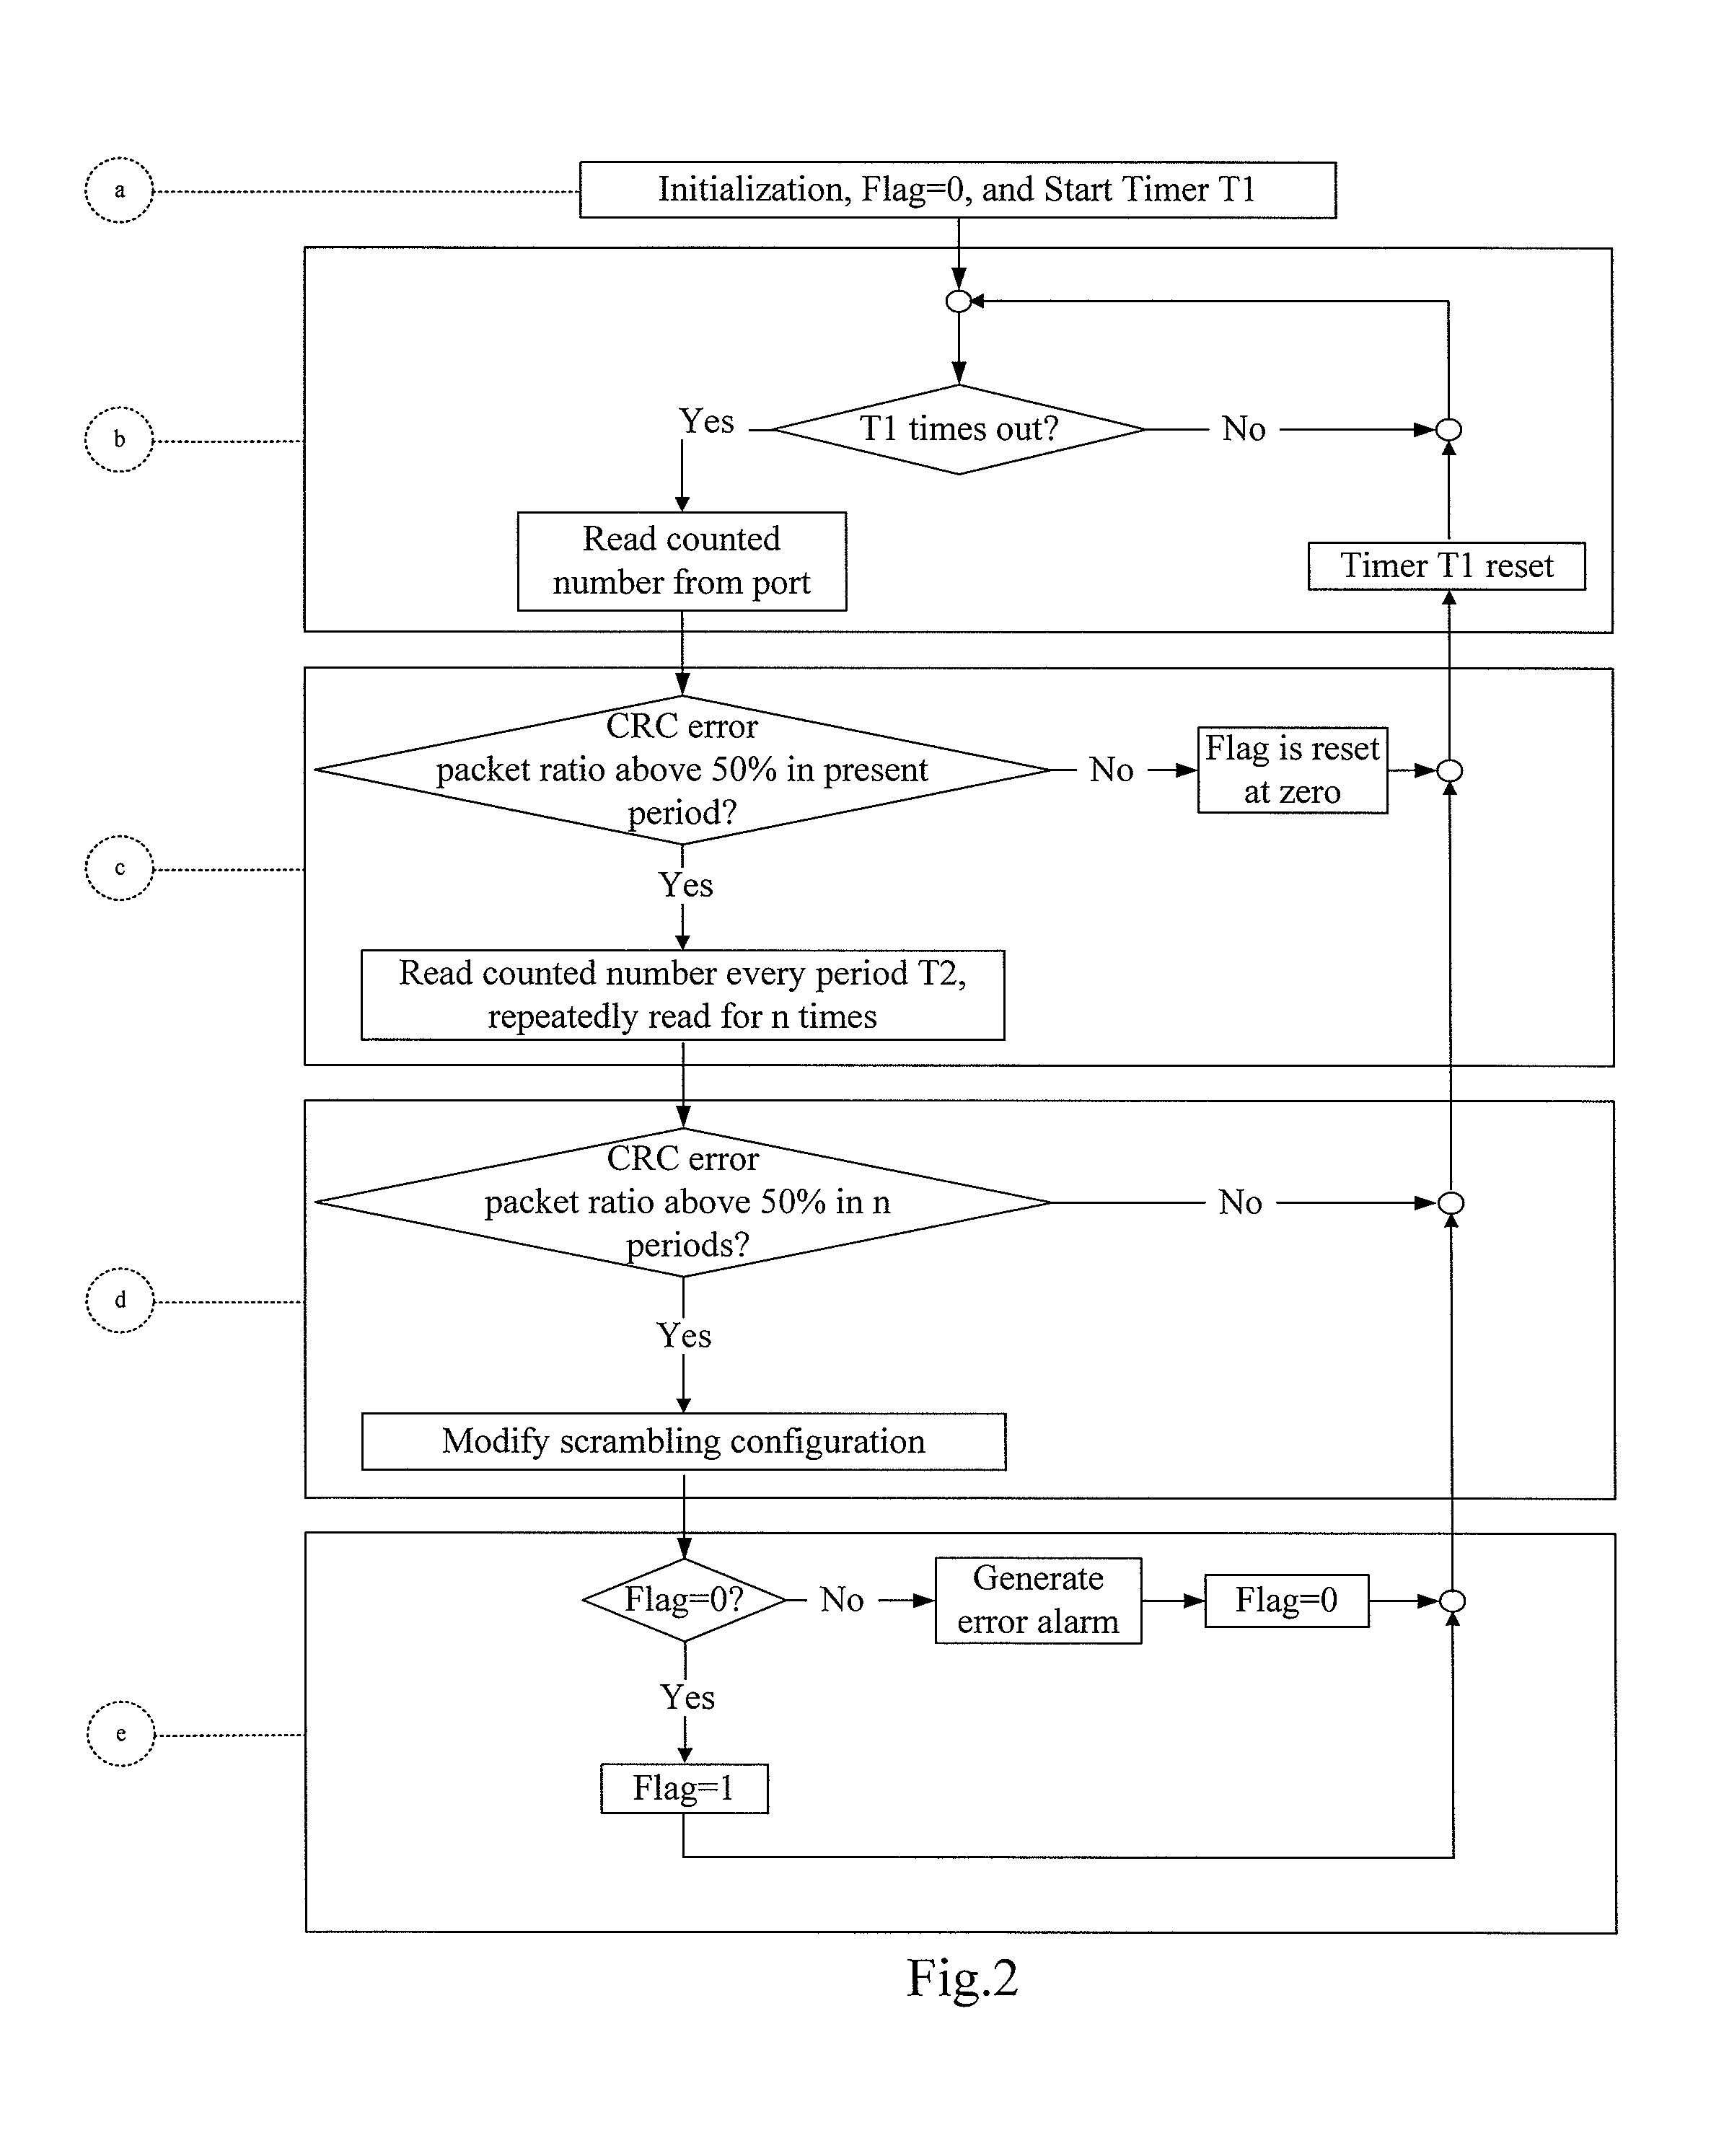 Detecting method and system for consistency of link scrambling configuration